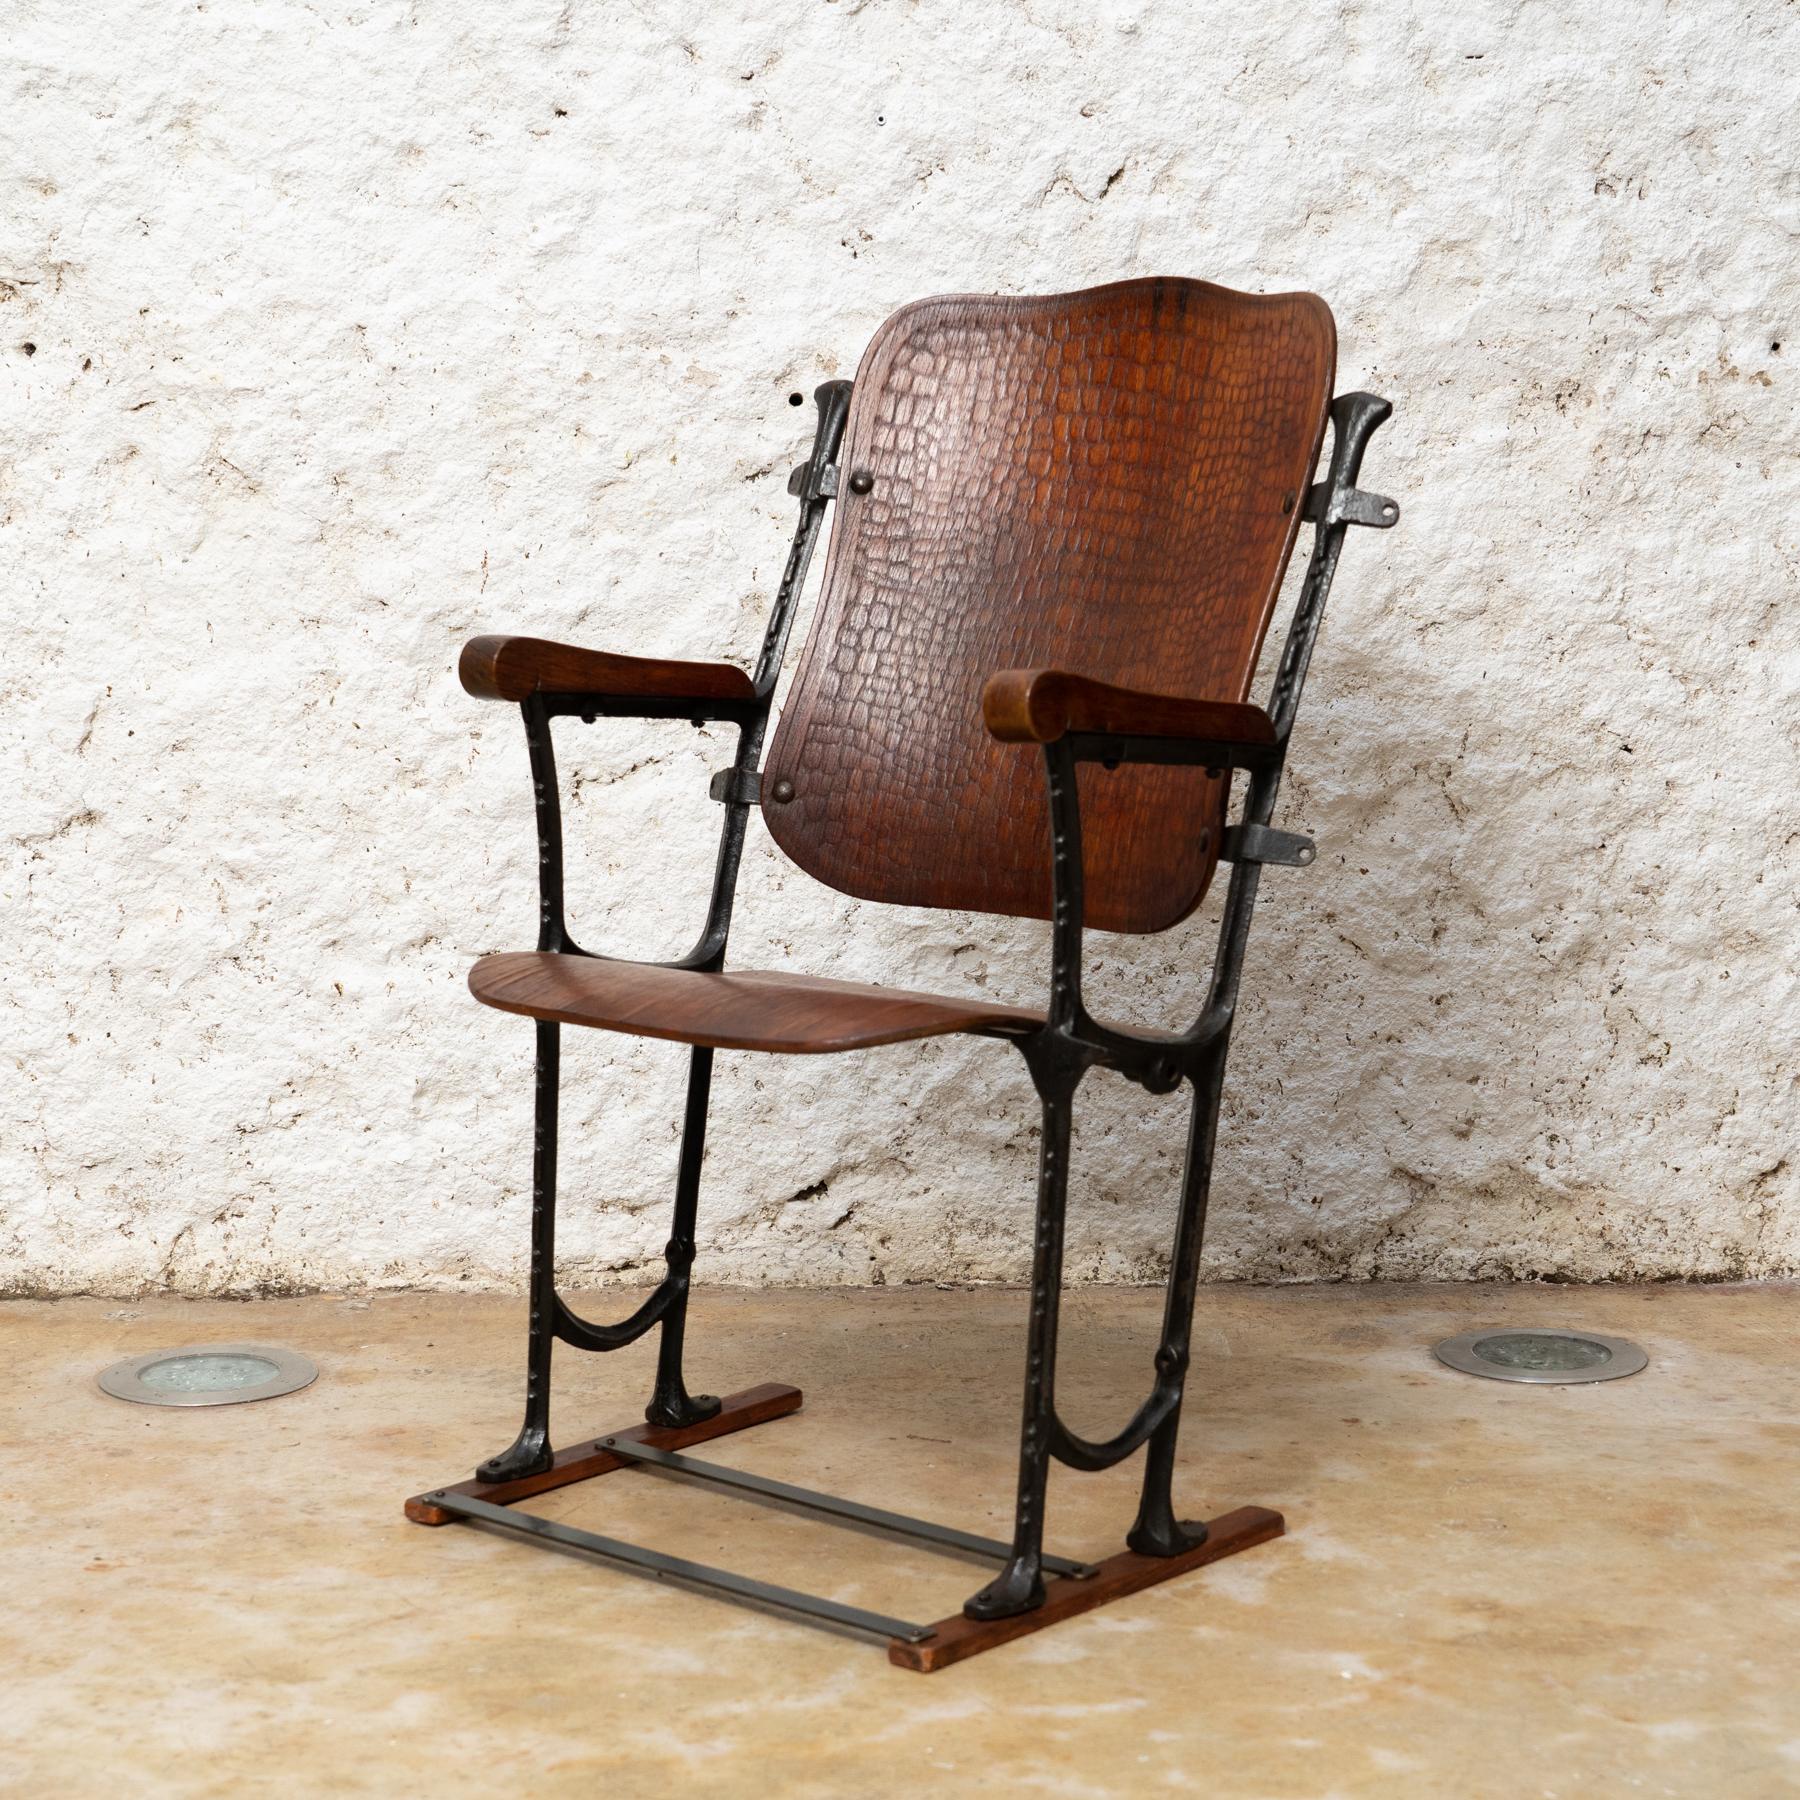 Iron Elegance in Time: Catalan Modernism Theater Chair 'Kursaal', c. 1930 For Sale